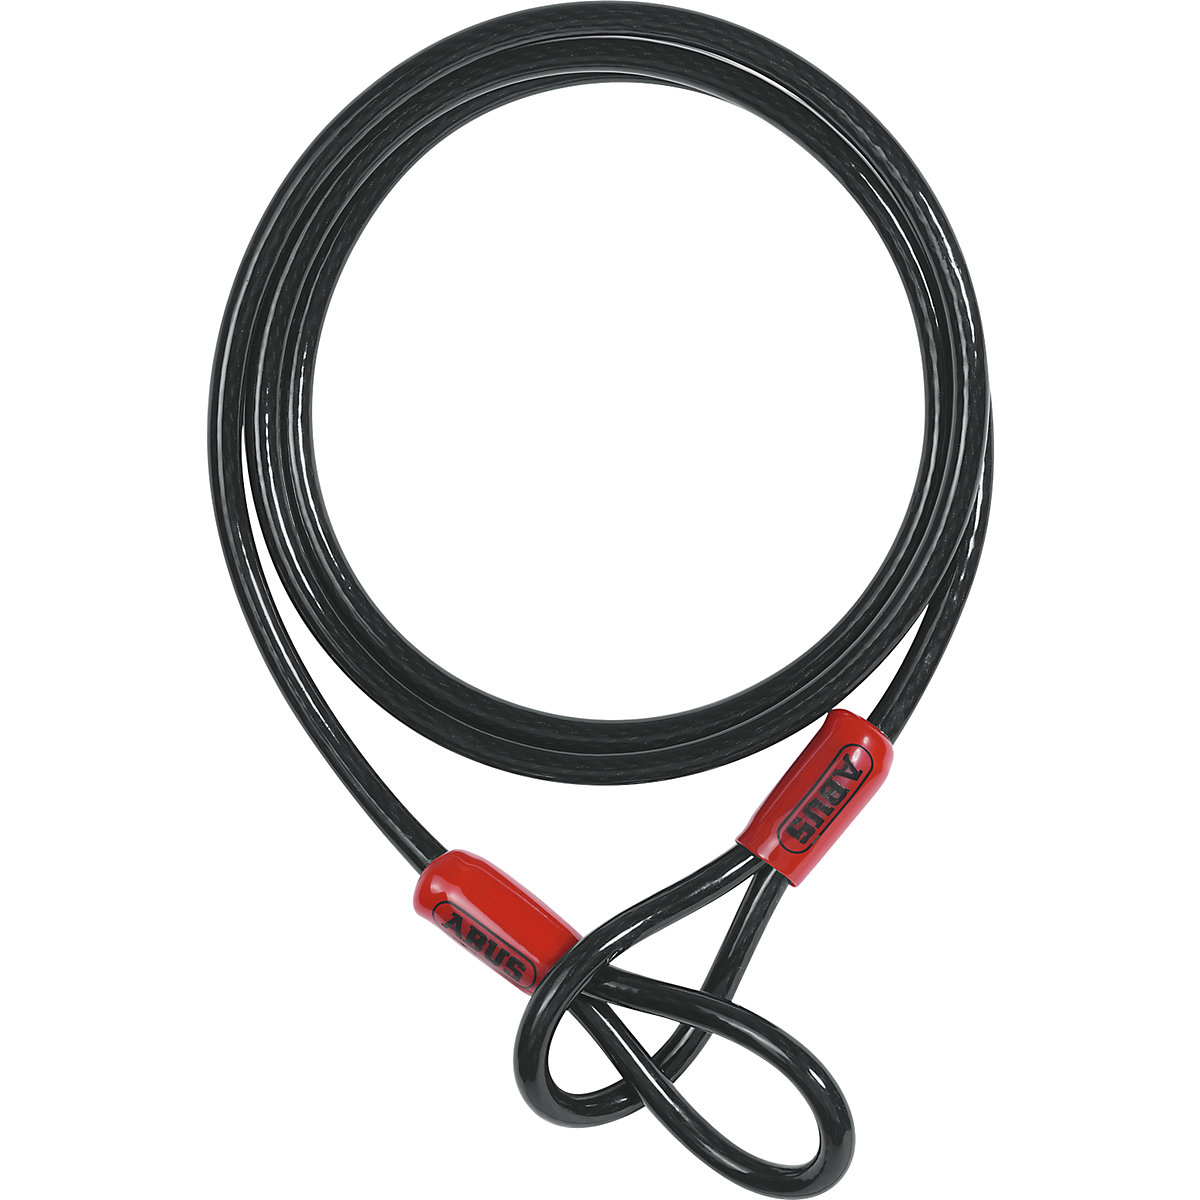 Additional lock cable with looped ends – ABUS